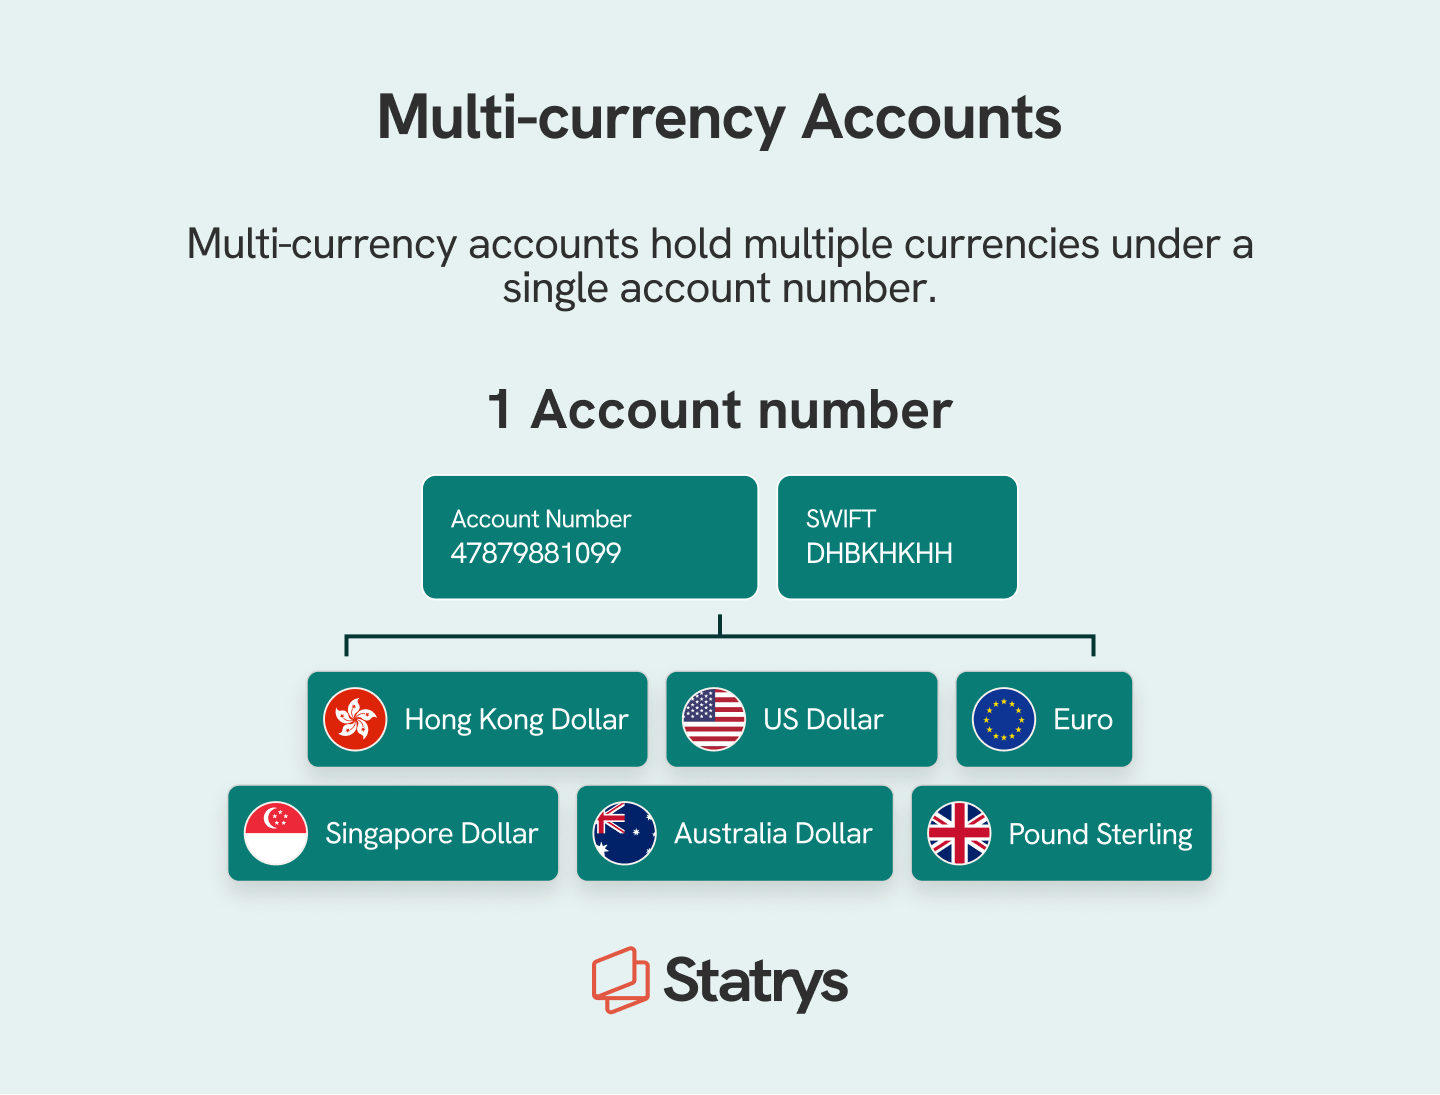 An infographic showing a multi-currency account